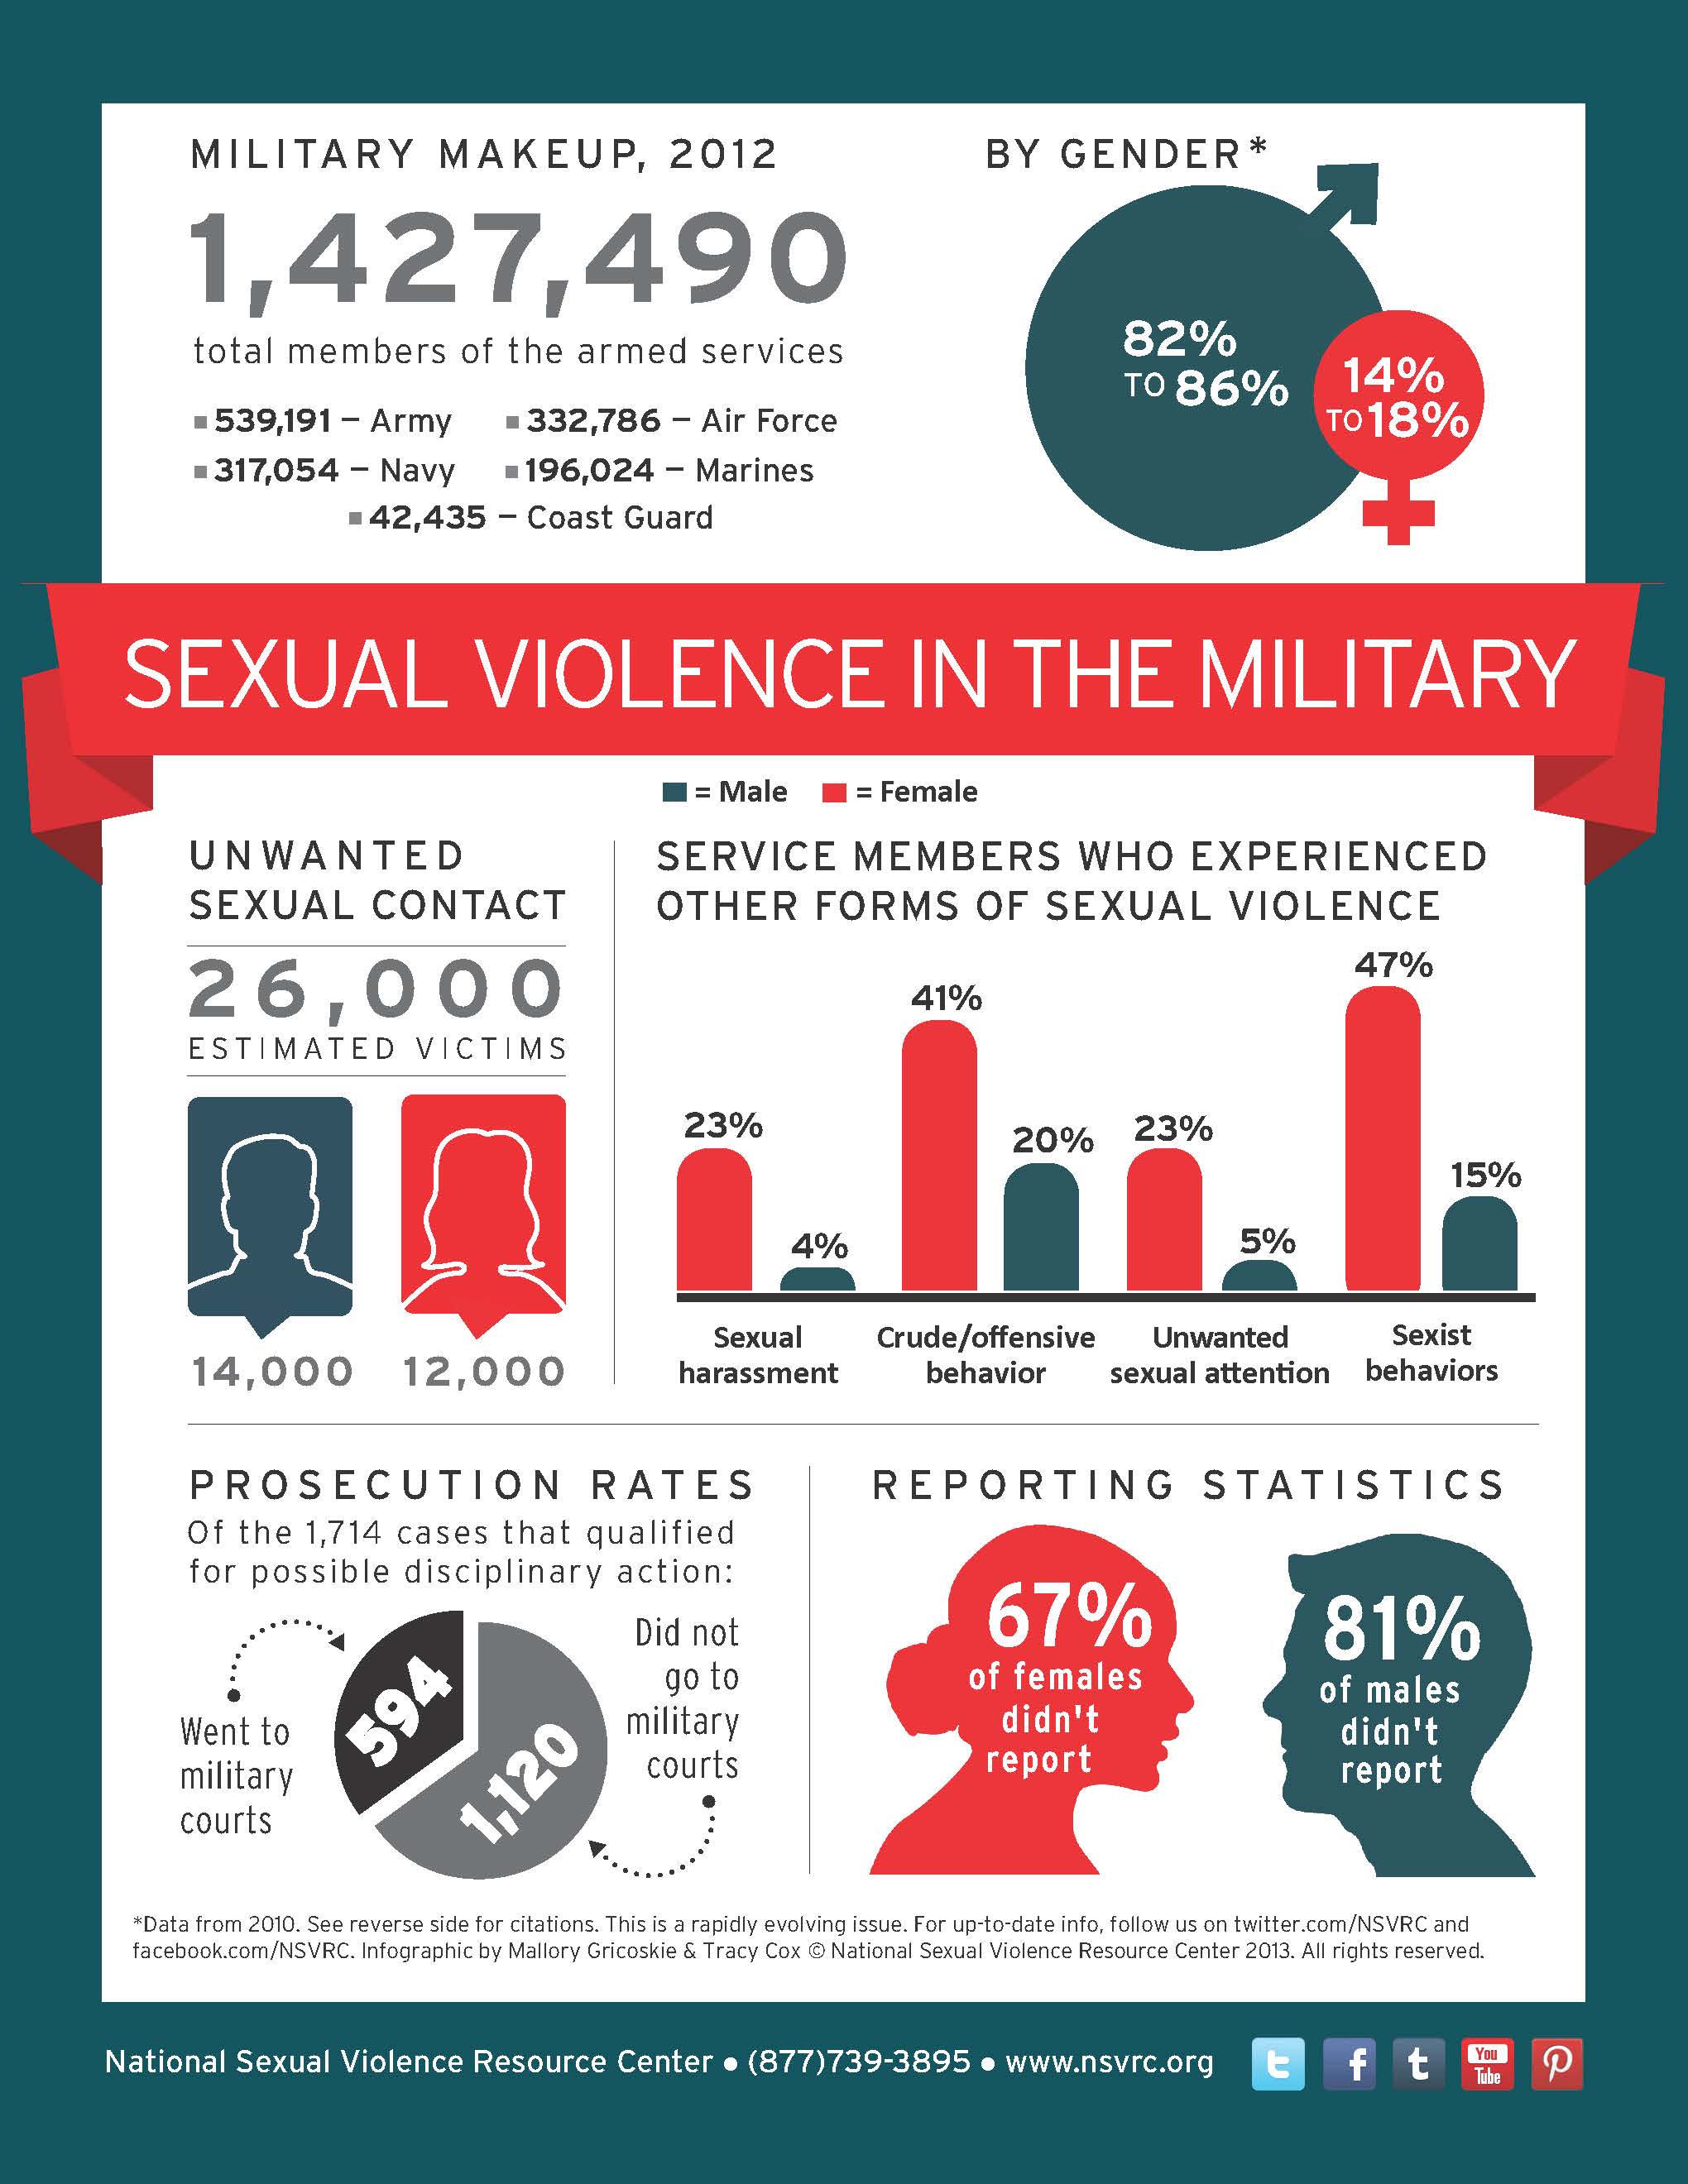 sexual violence against women in armed conflict settings caneco